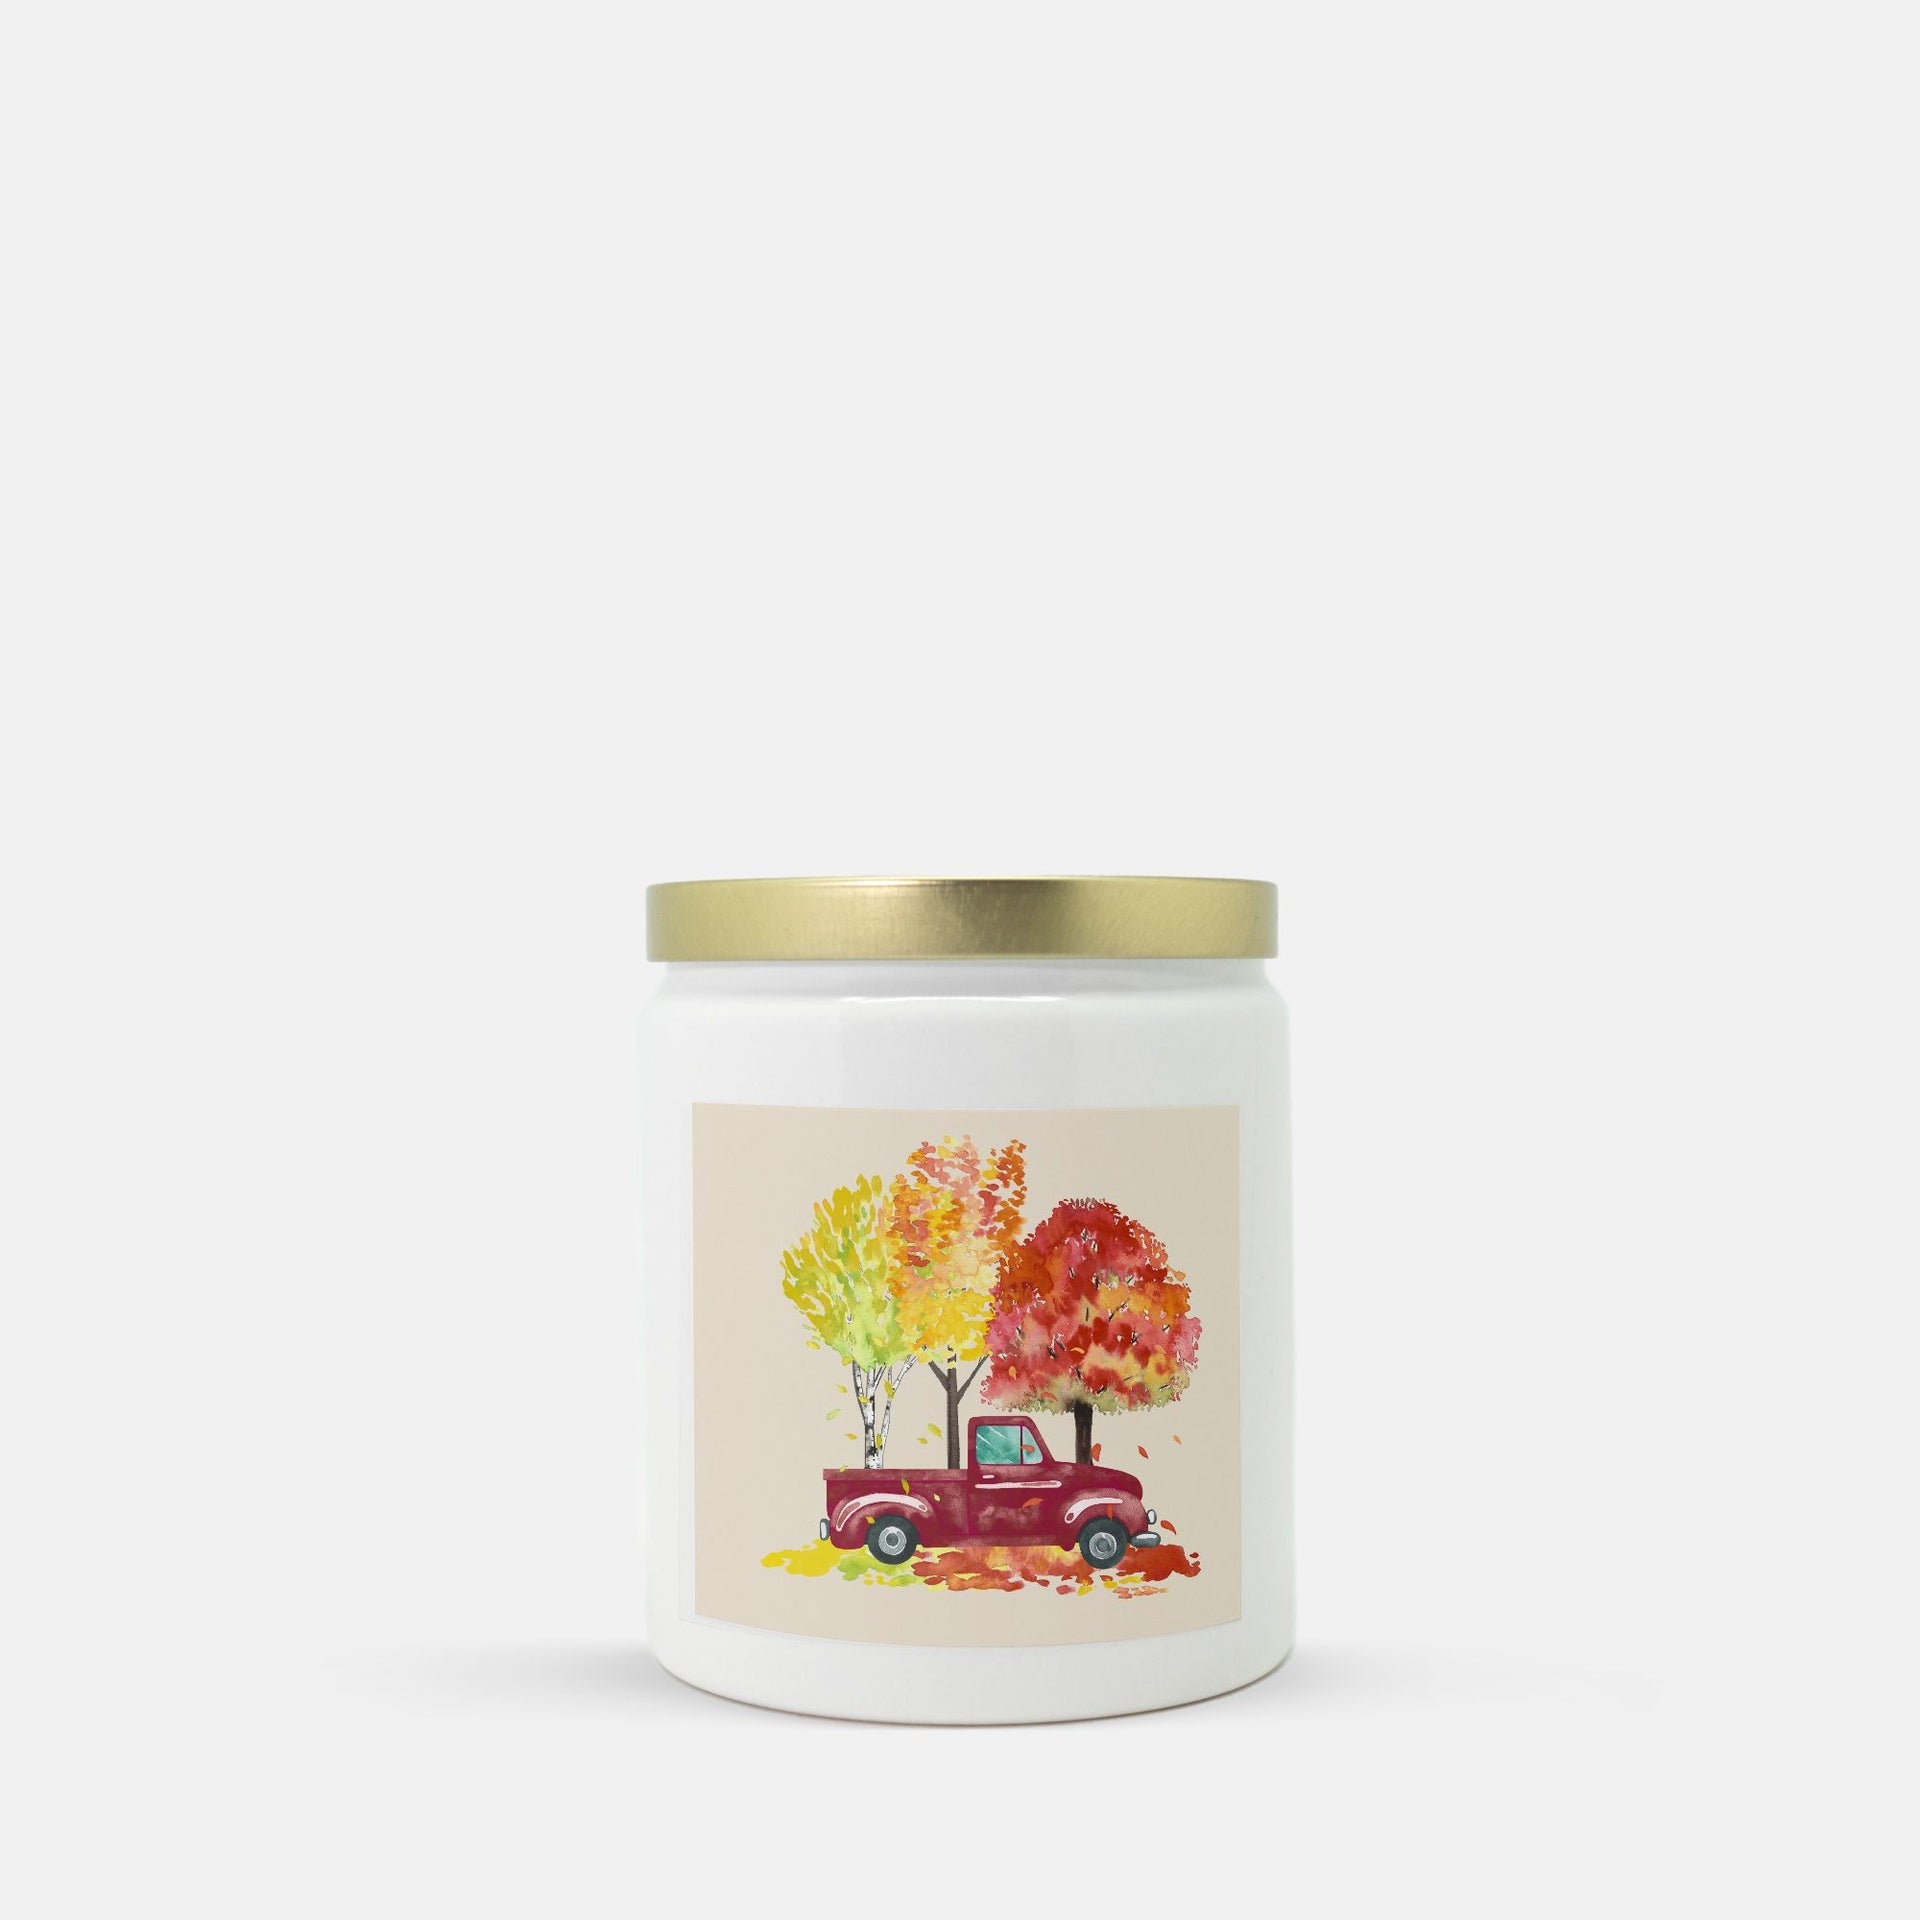 Lifestyle Details - Red Rustic Truck & Trees Ceramic Candle w Gold Lid - Vanilla Bean